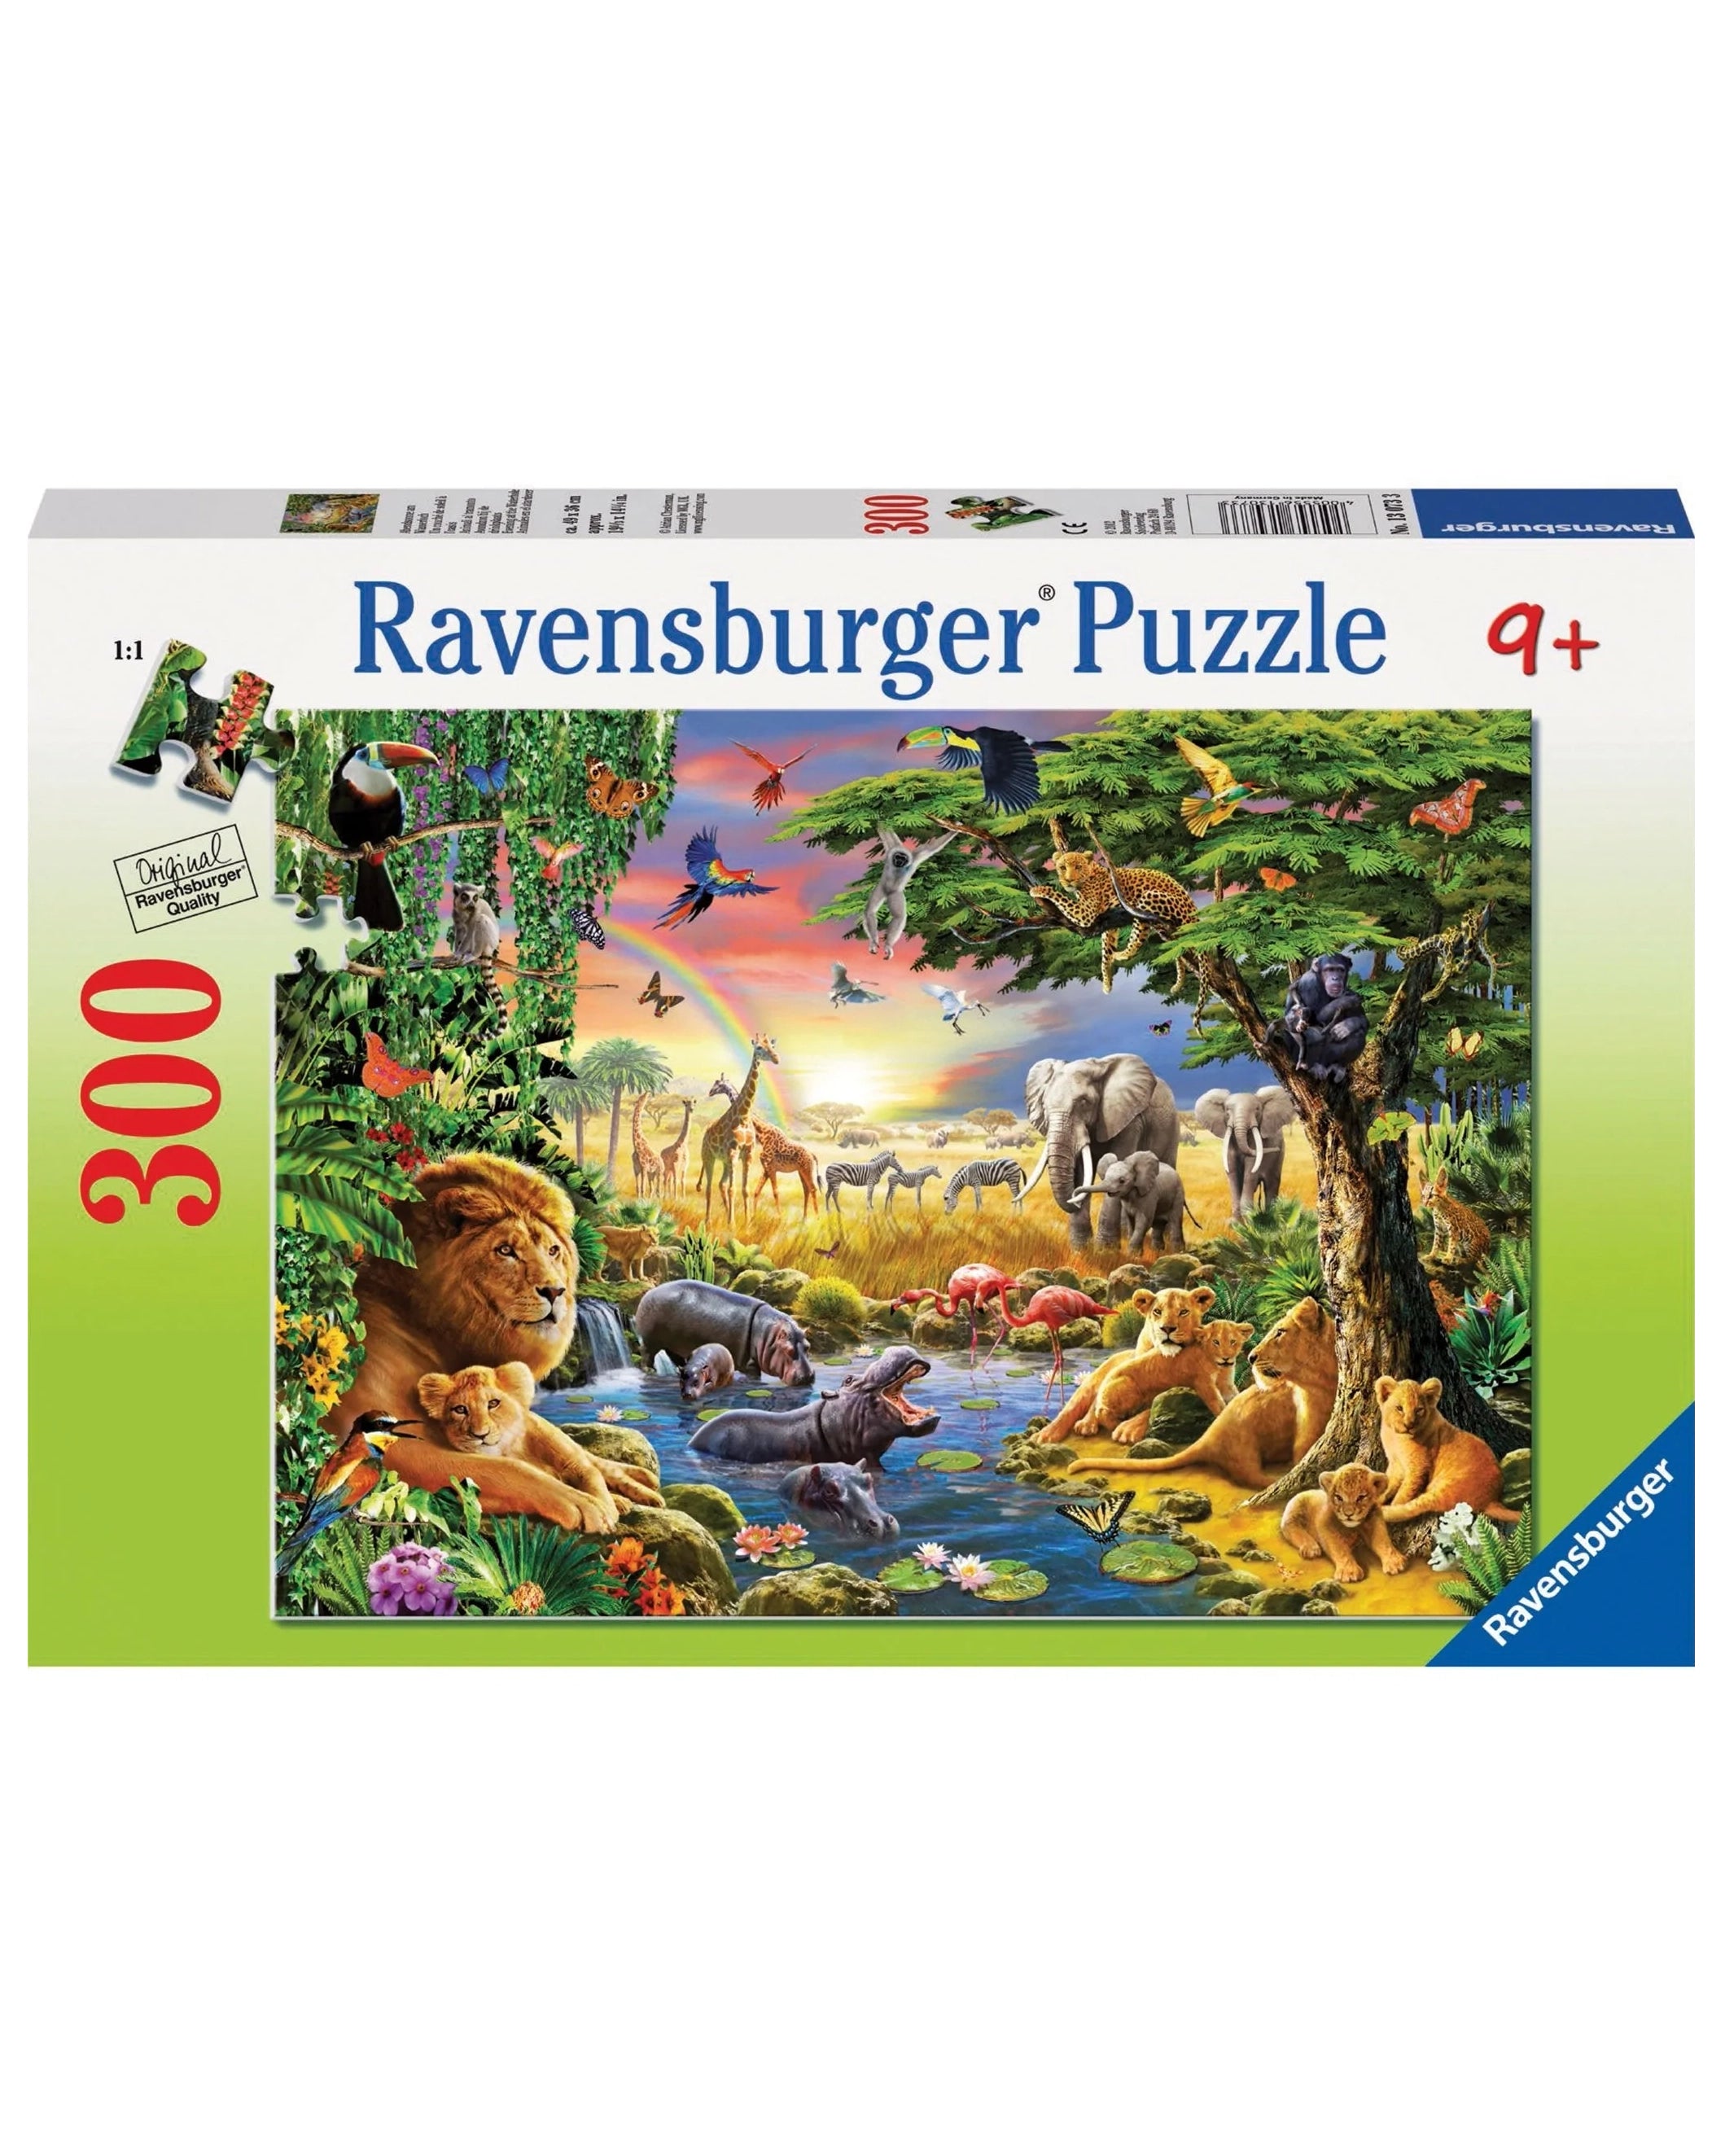 Ravensburger Puzzle - At The Watering Hole 300pc